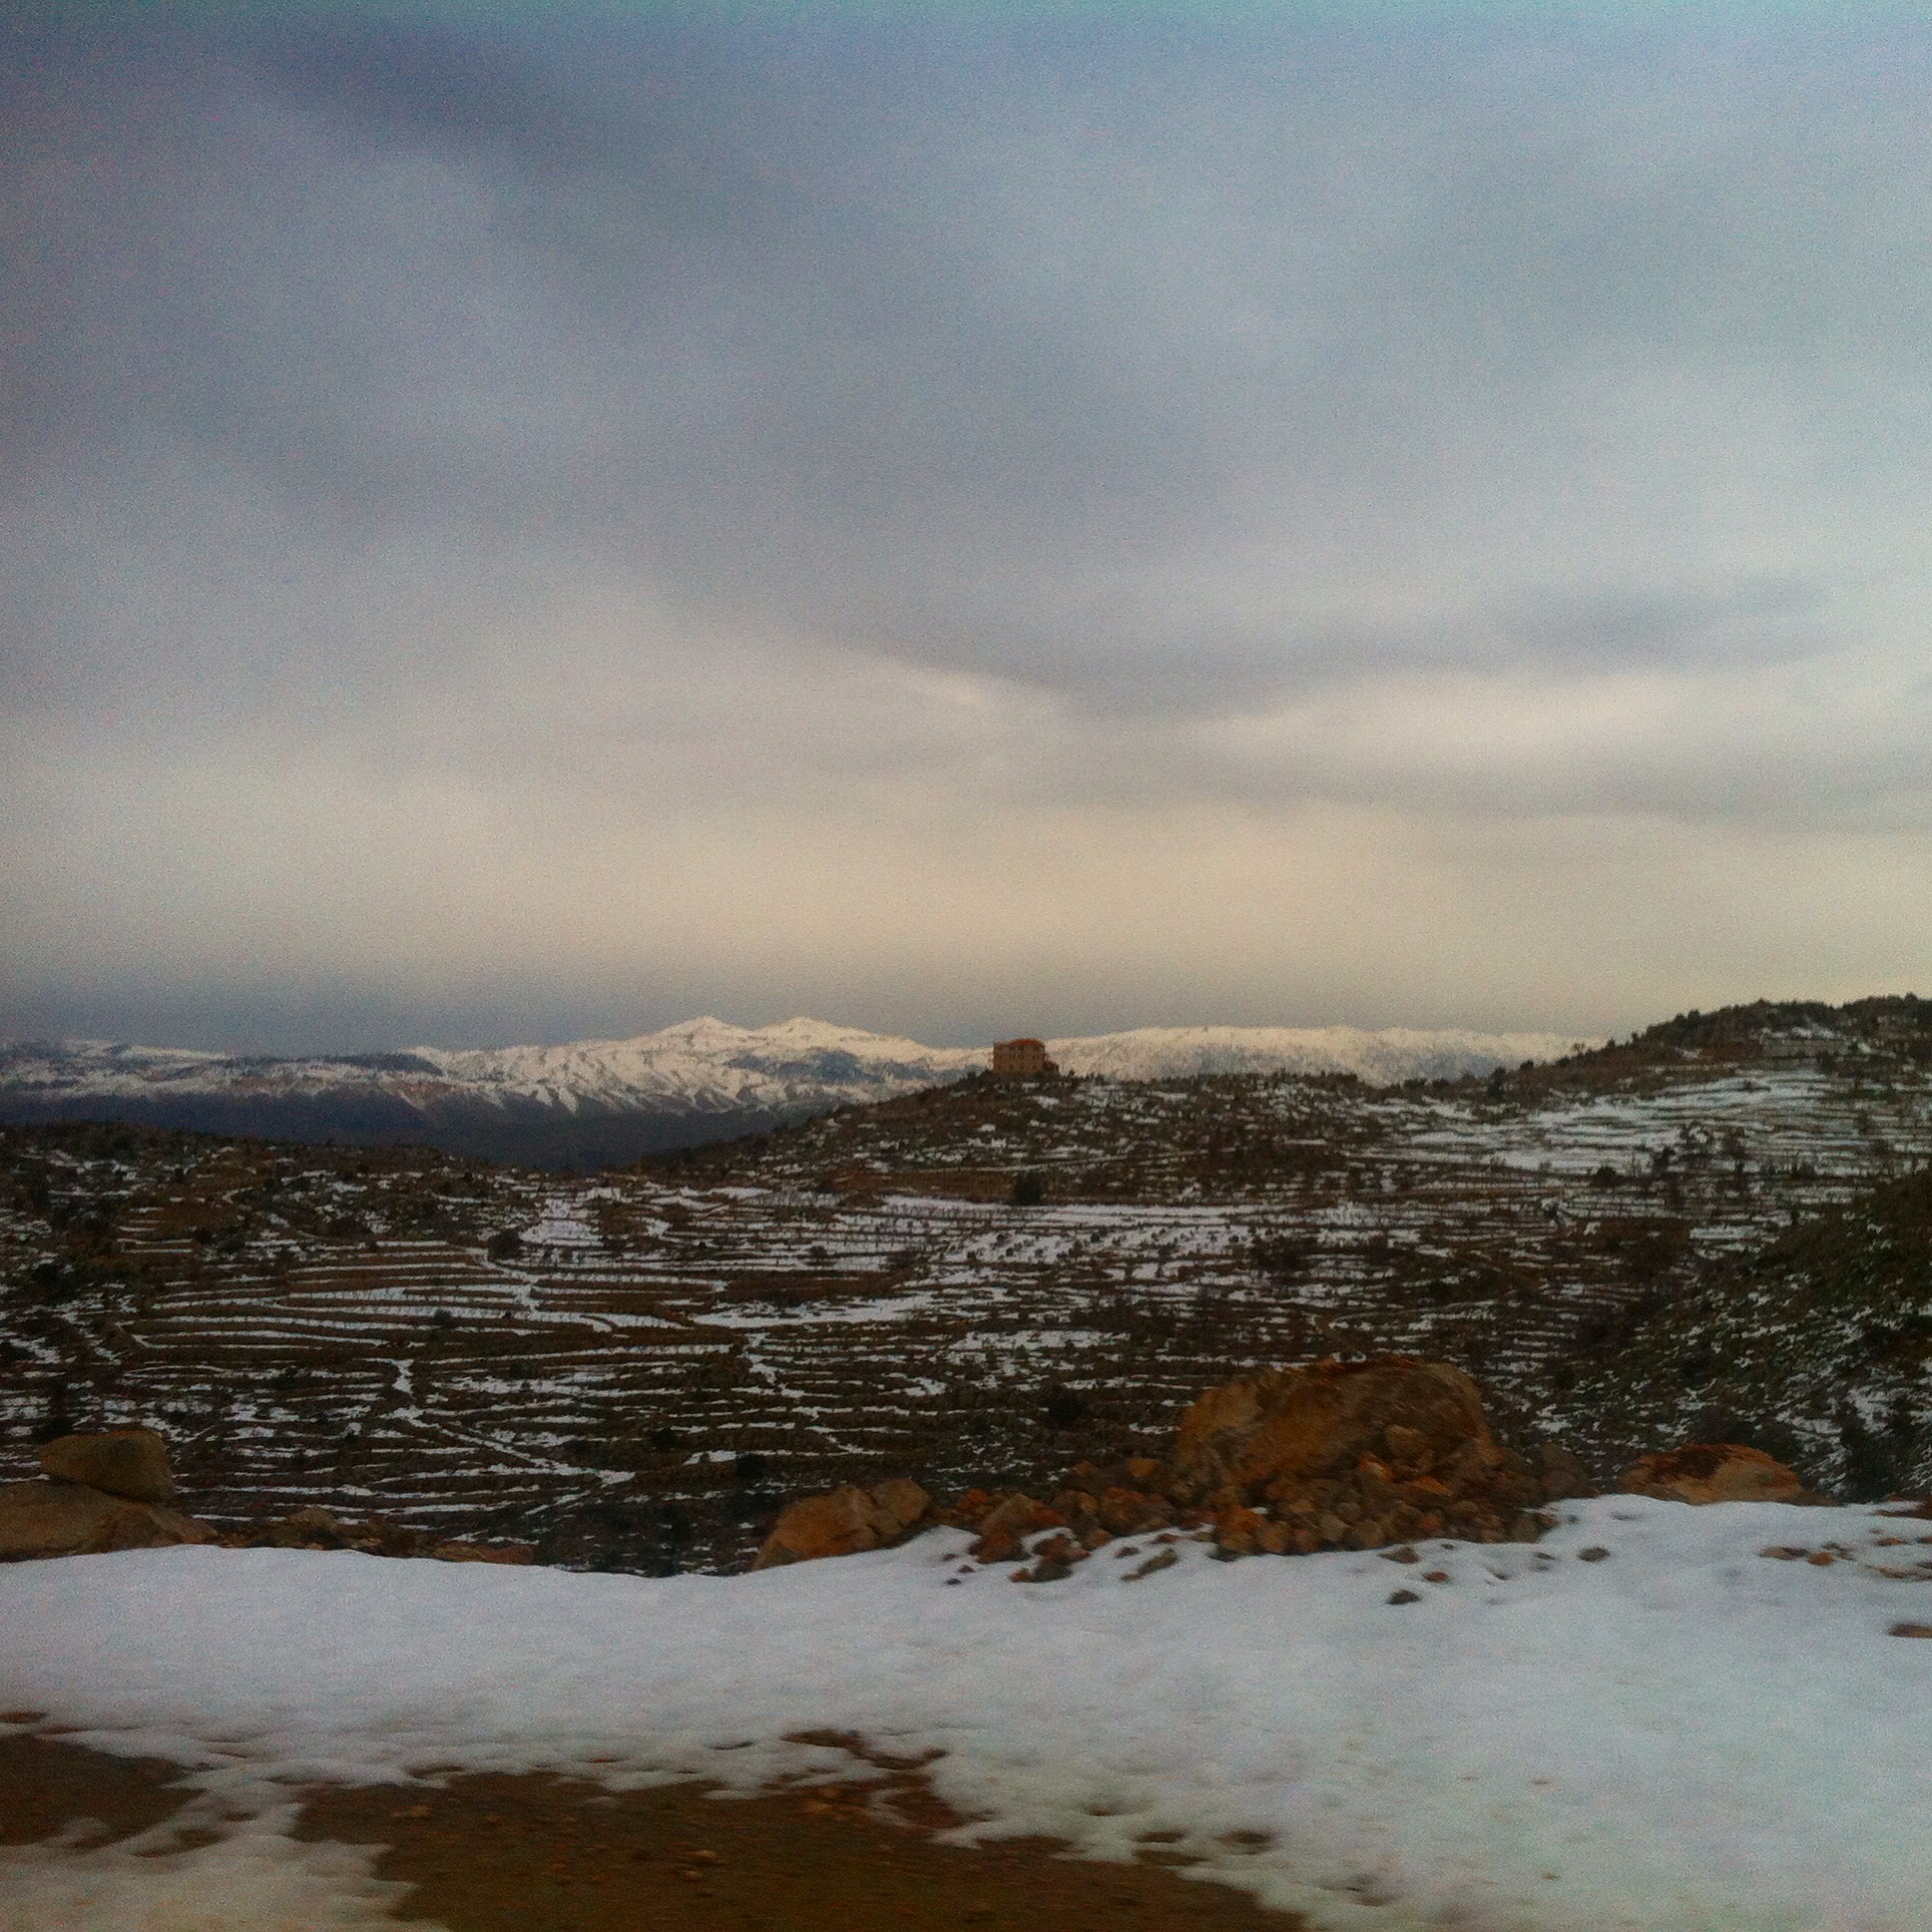  SHEBAA | The edge of south Lebanon, Israel to the south and Syria to the east. February 25, 2015.&nbsp; 